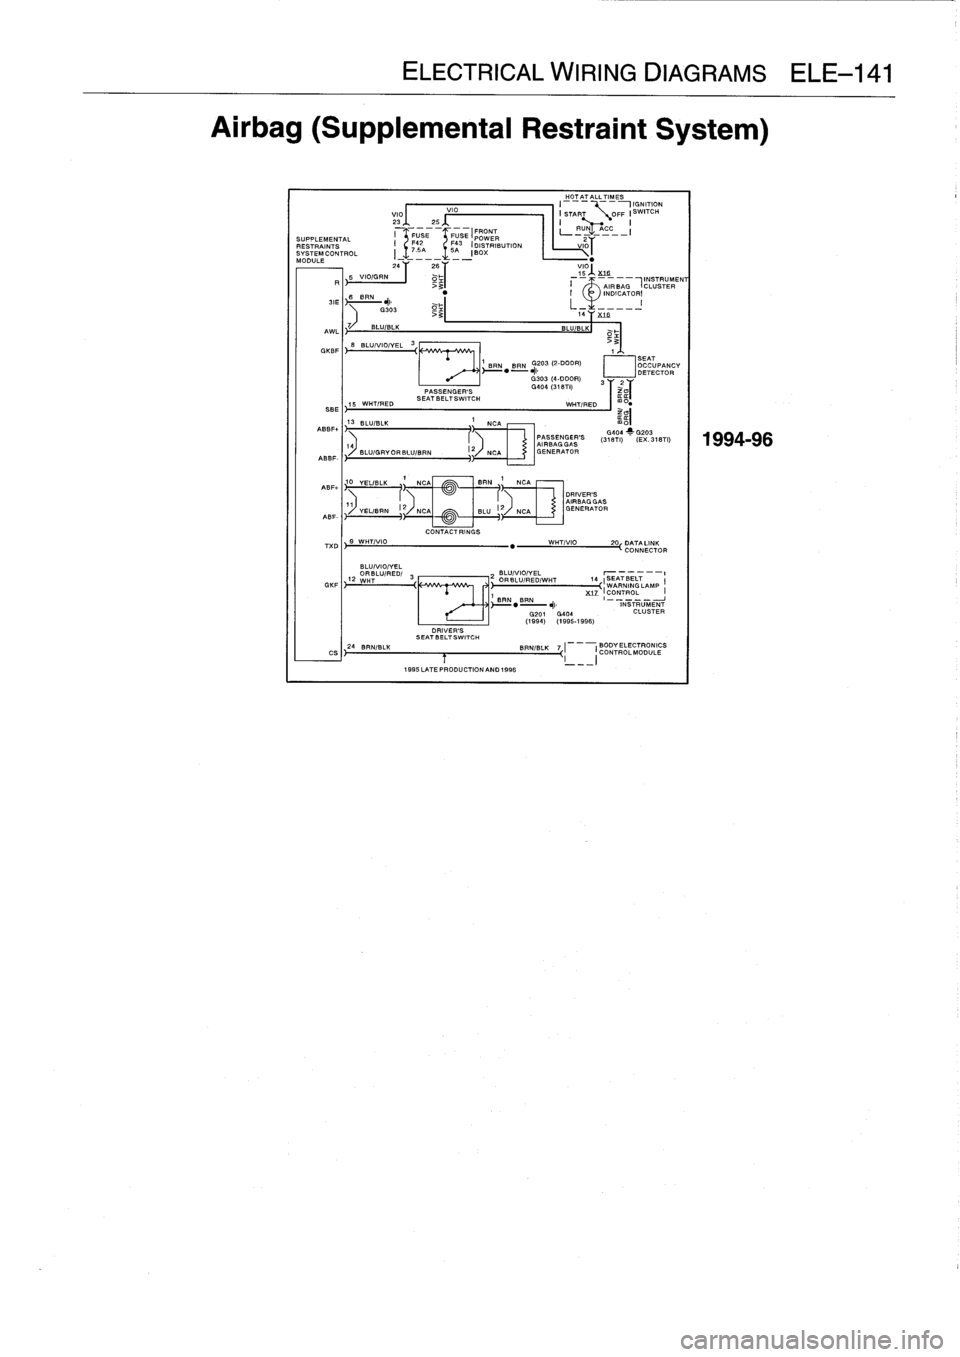 BMW 318i 1997 E36 Repair Manual 
ELECTRICAL
WIRING
DIAGRAMS
ELE-141

Airbag
(Supplemental
Restraint
System)

_
HO
_
TA
_
TALL
_
TIMES
I

	

IGNITION
VIO

	

VIO

	

I
START

	

OFF
!SWITCH
23
__
25
___

	

I

	

!
~`

	

(FRONT

	

